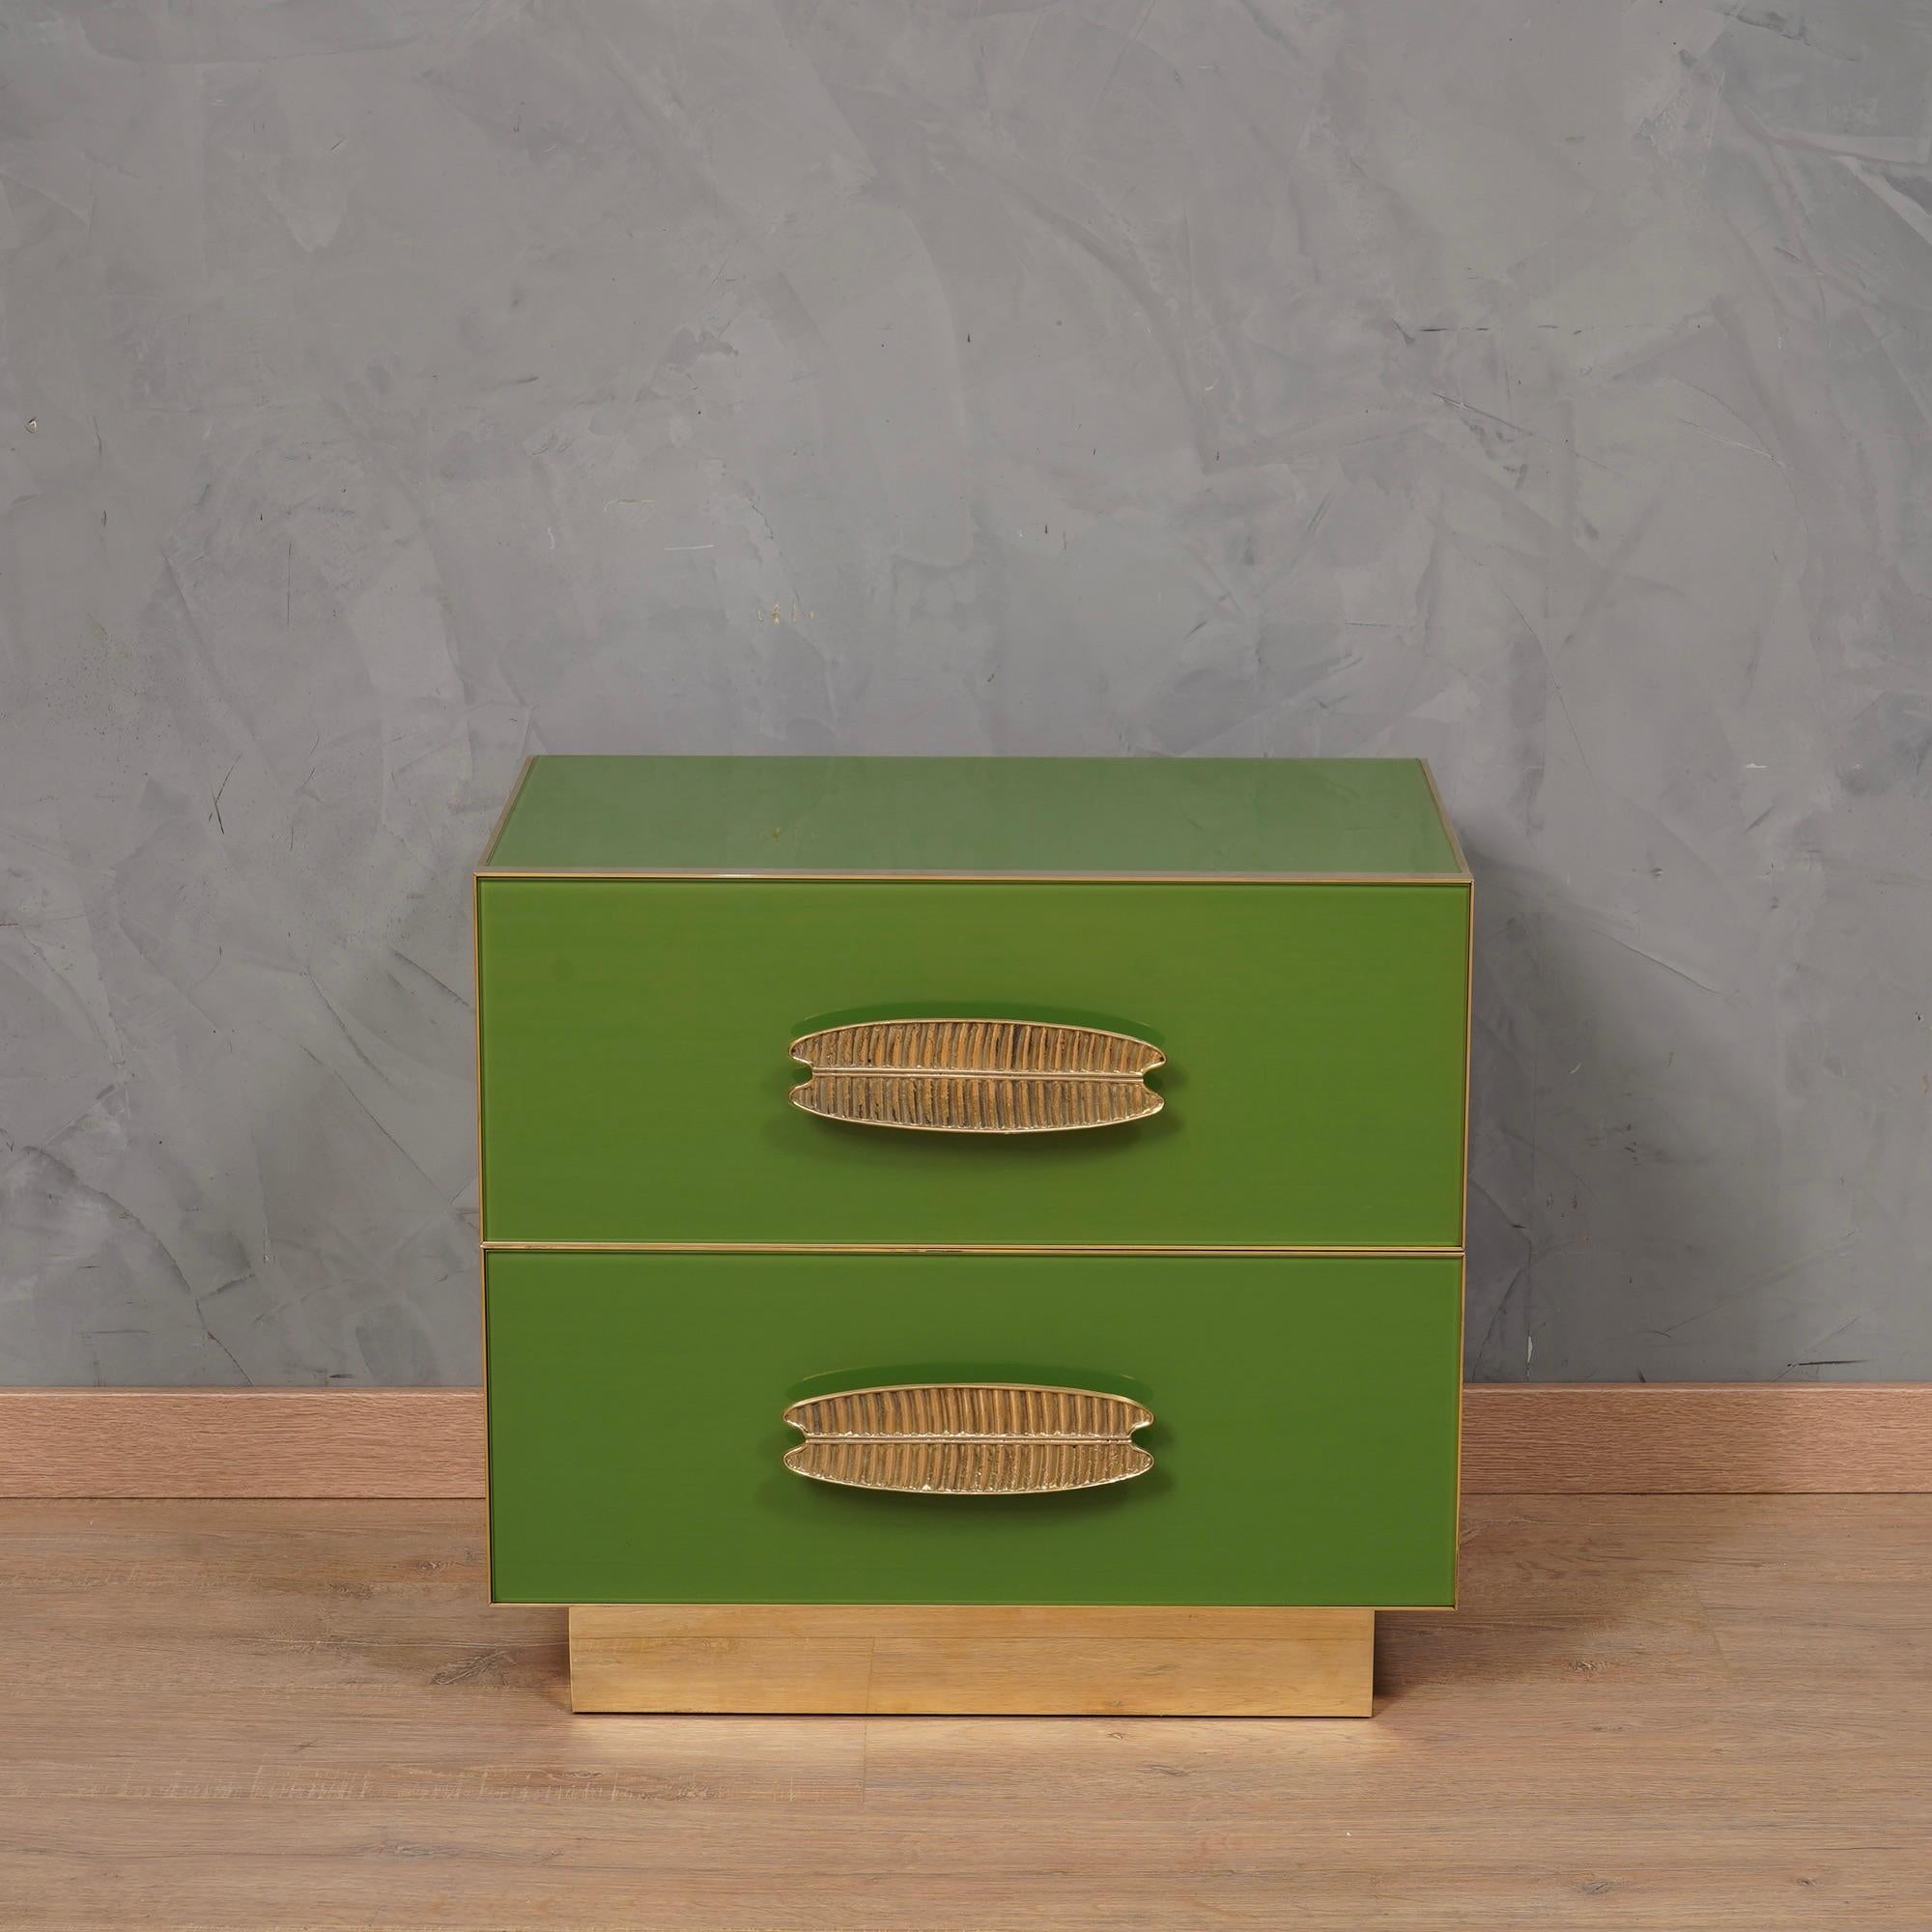 Classic design for a pair of night tables all in green colored glass and brass. Square and linear as in the style of that period.

The bedside tables have a wooden structure, above they have been covered with green colored glass; its precise hue